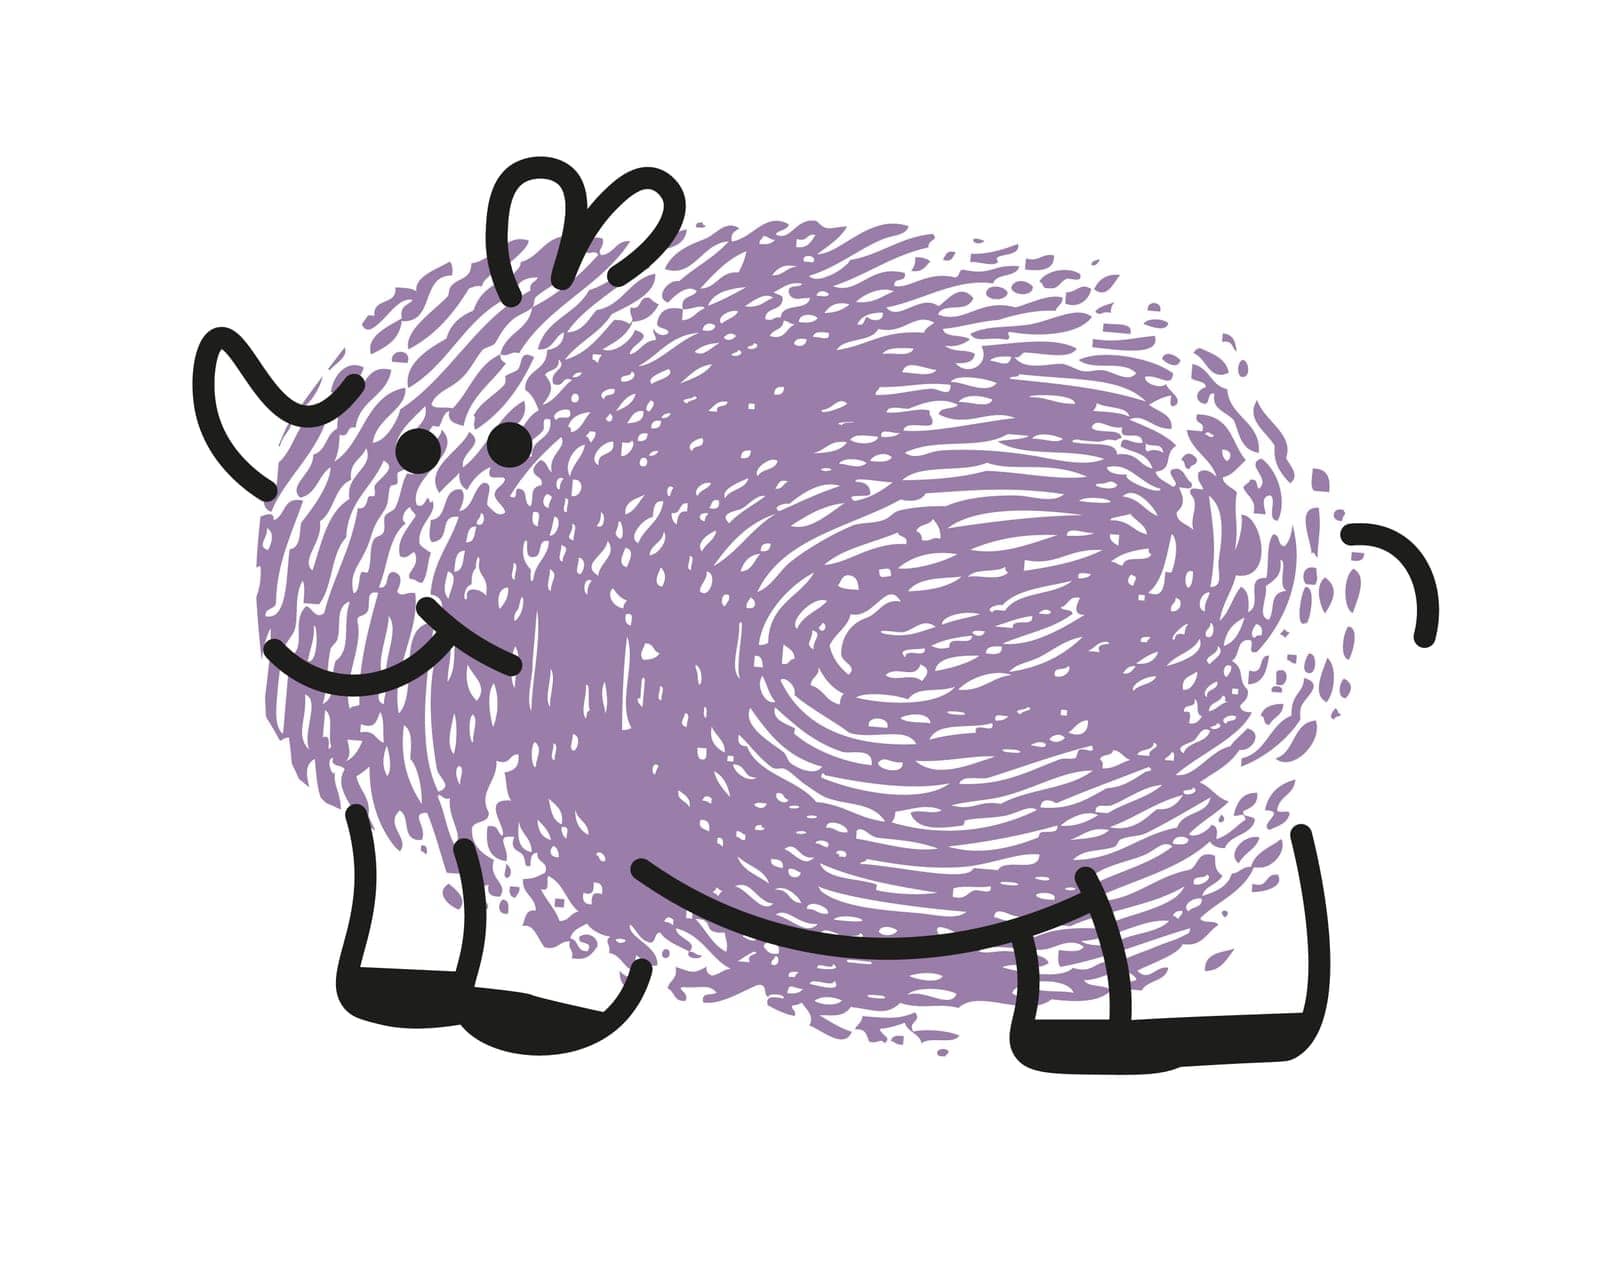 Rhinoceros thumbprint, isolated portrait of mammal animal with one horn. Rhino personage with smiling muzzle facial expression. Simple drawing of character with finger stamp, vector in flat style